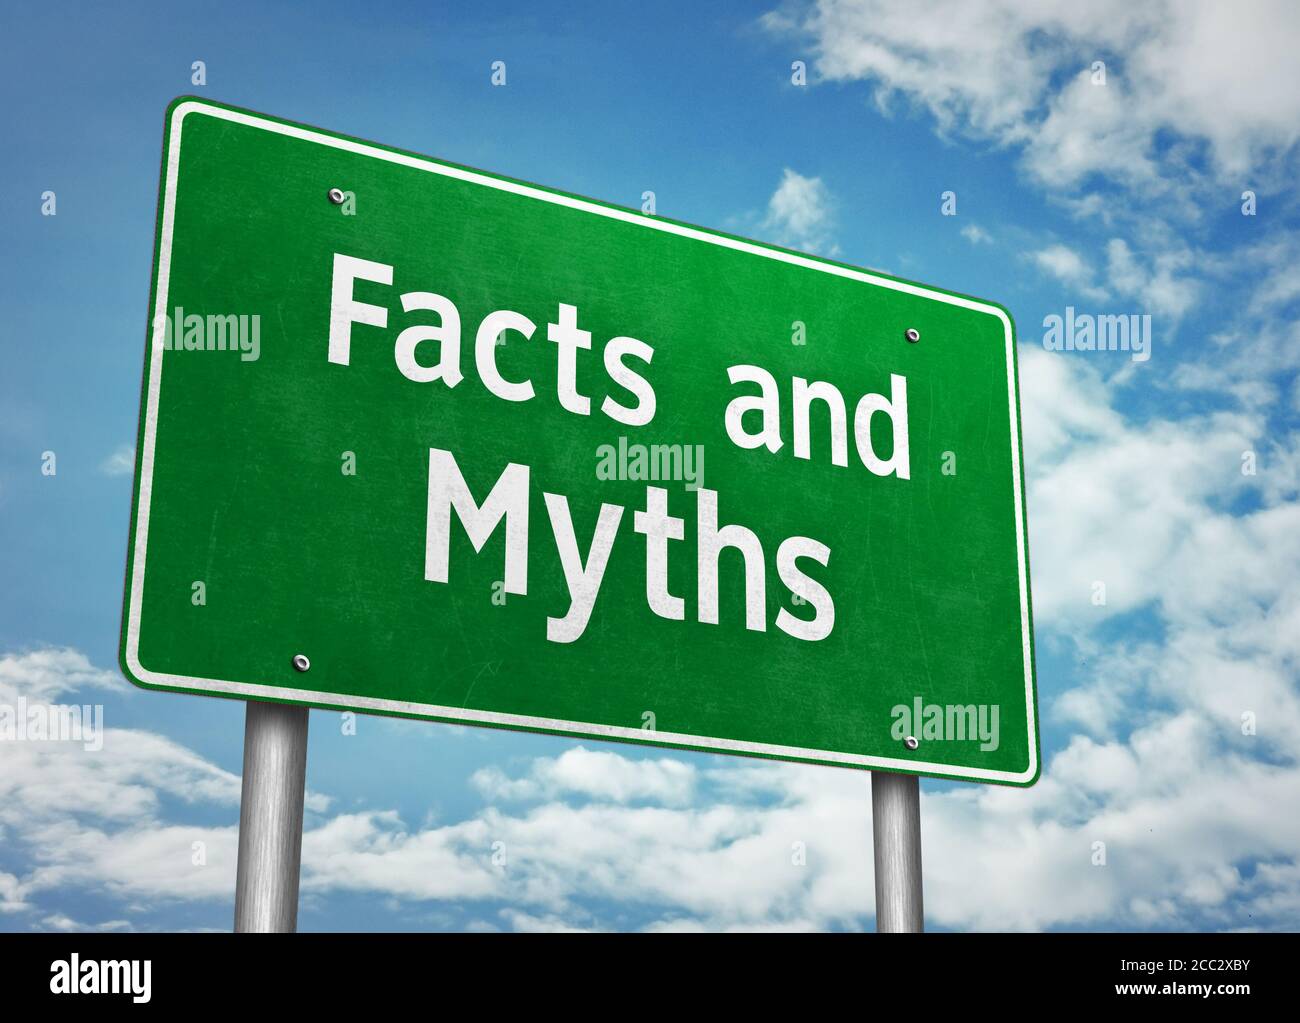 Facts and Myths - roadsign information Stock Photo